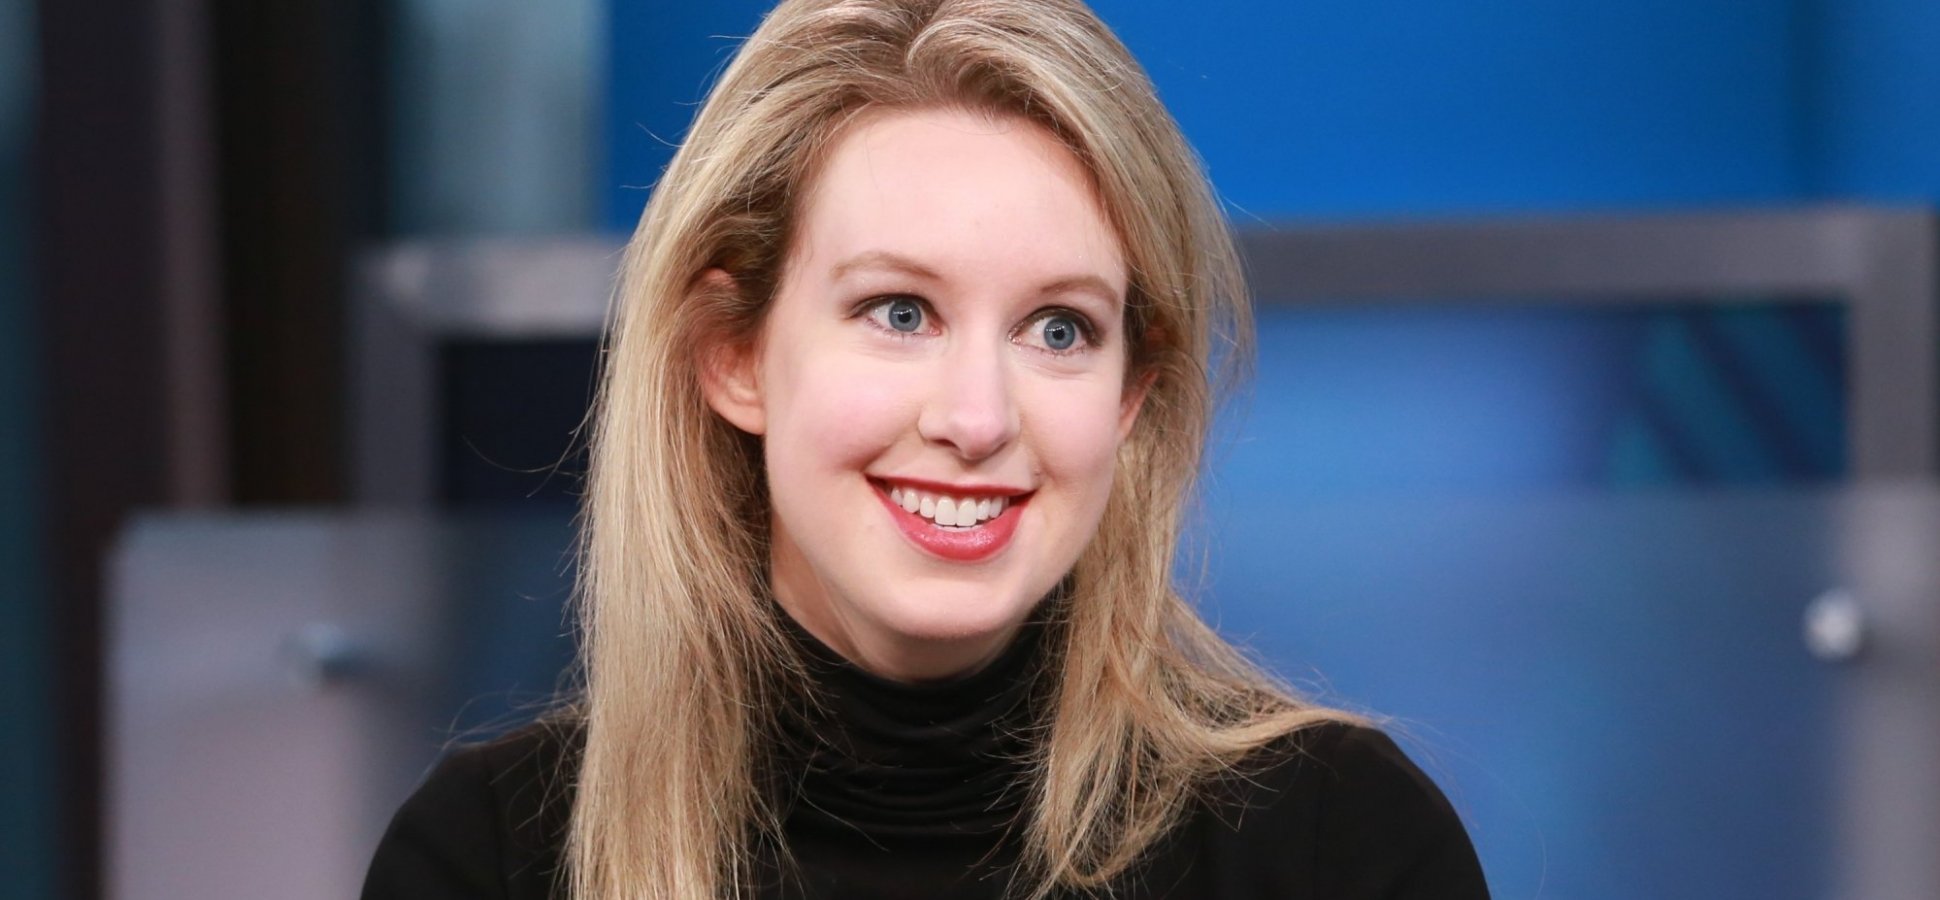 Elizabeth holmes accidentally uses real voice 2016